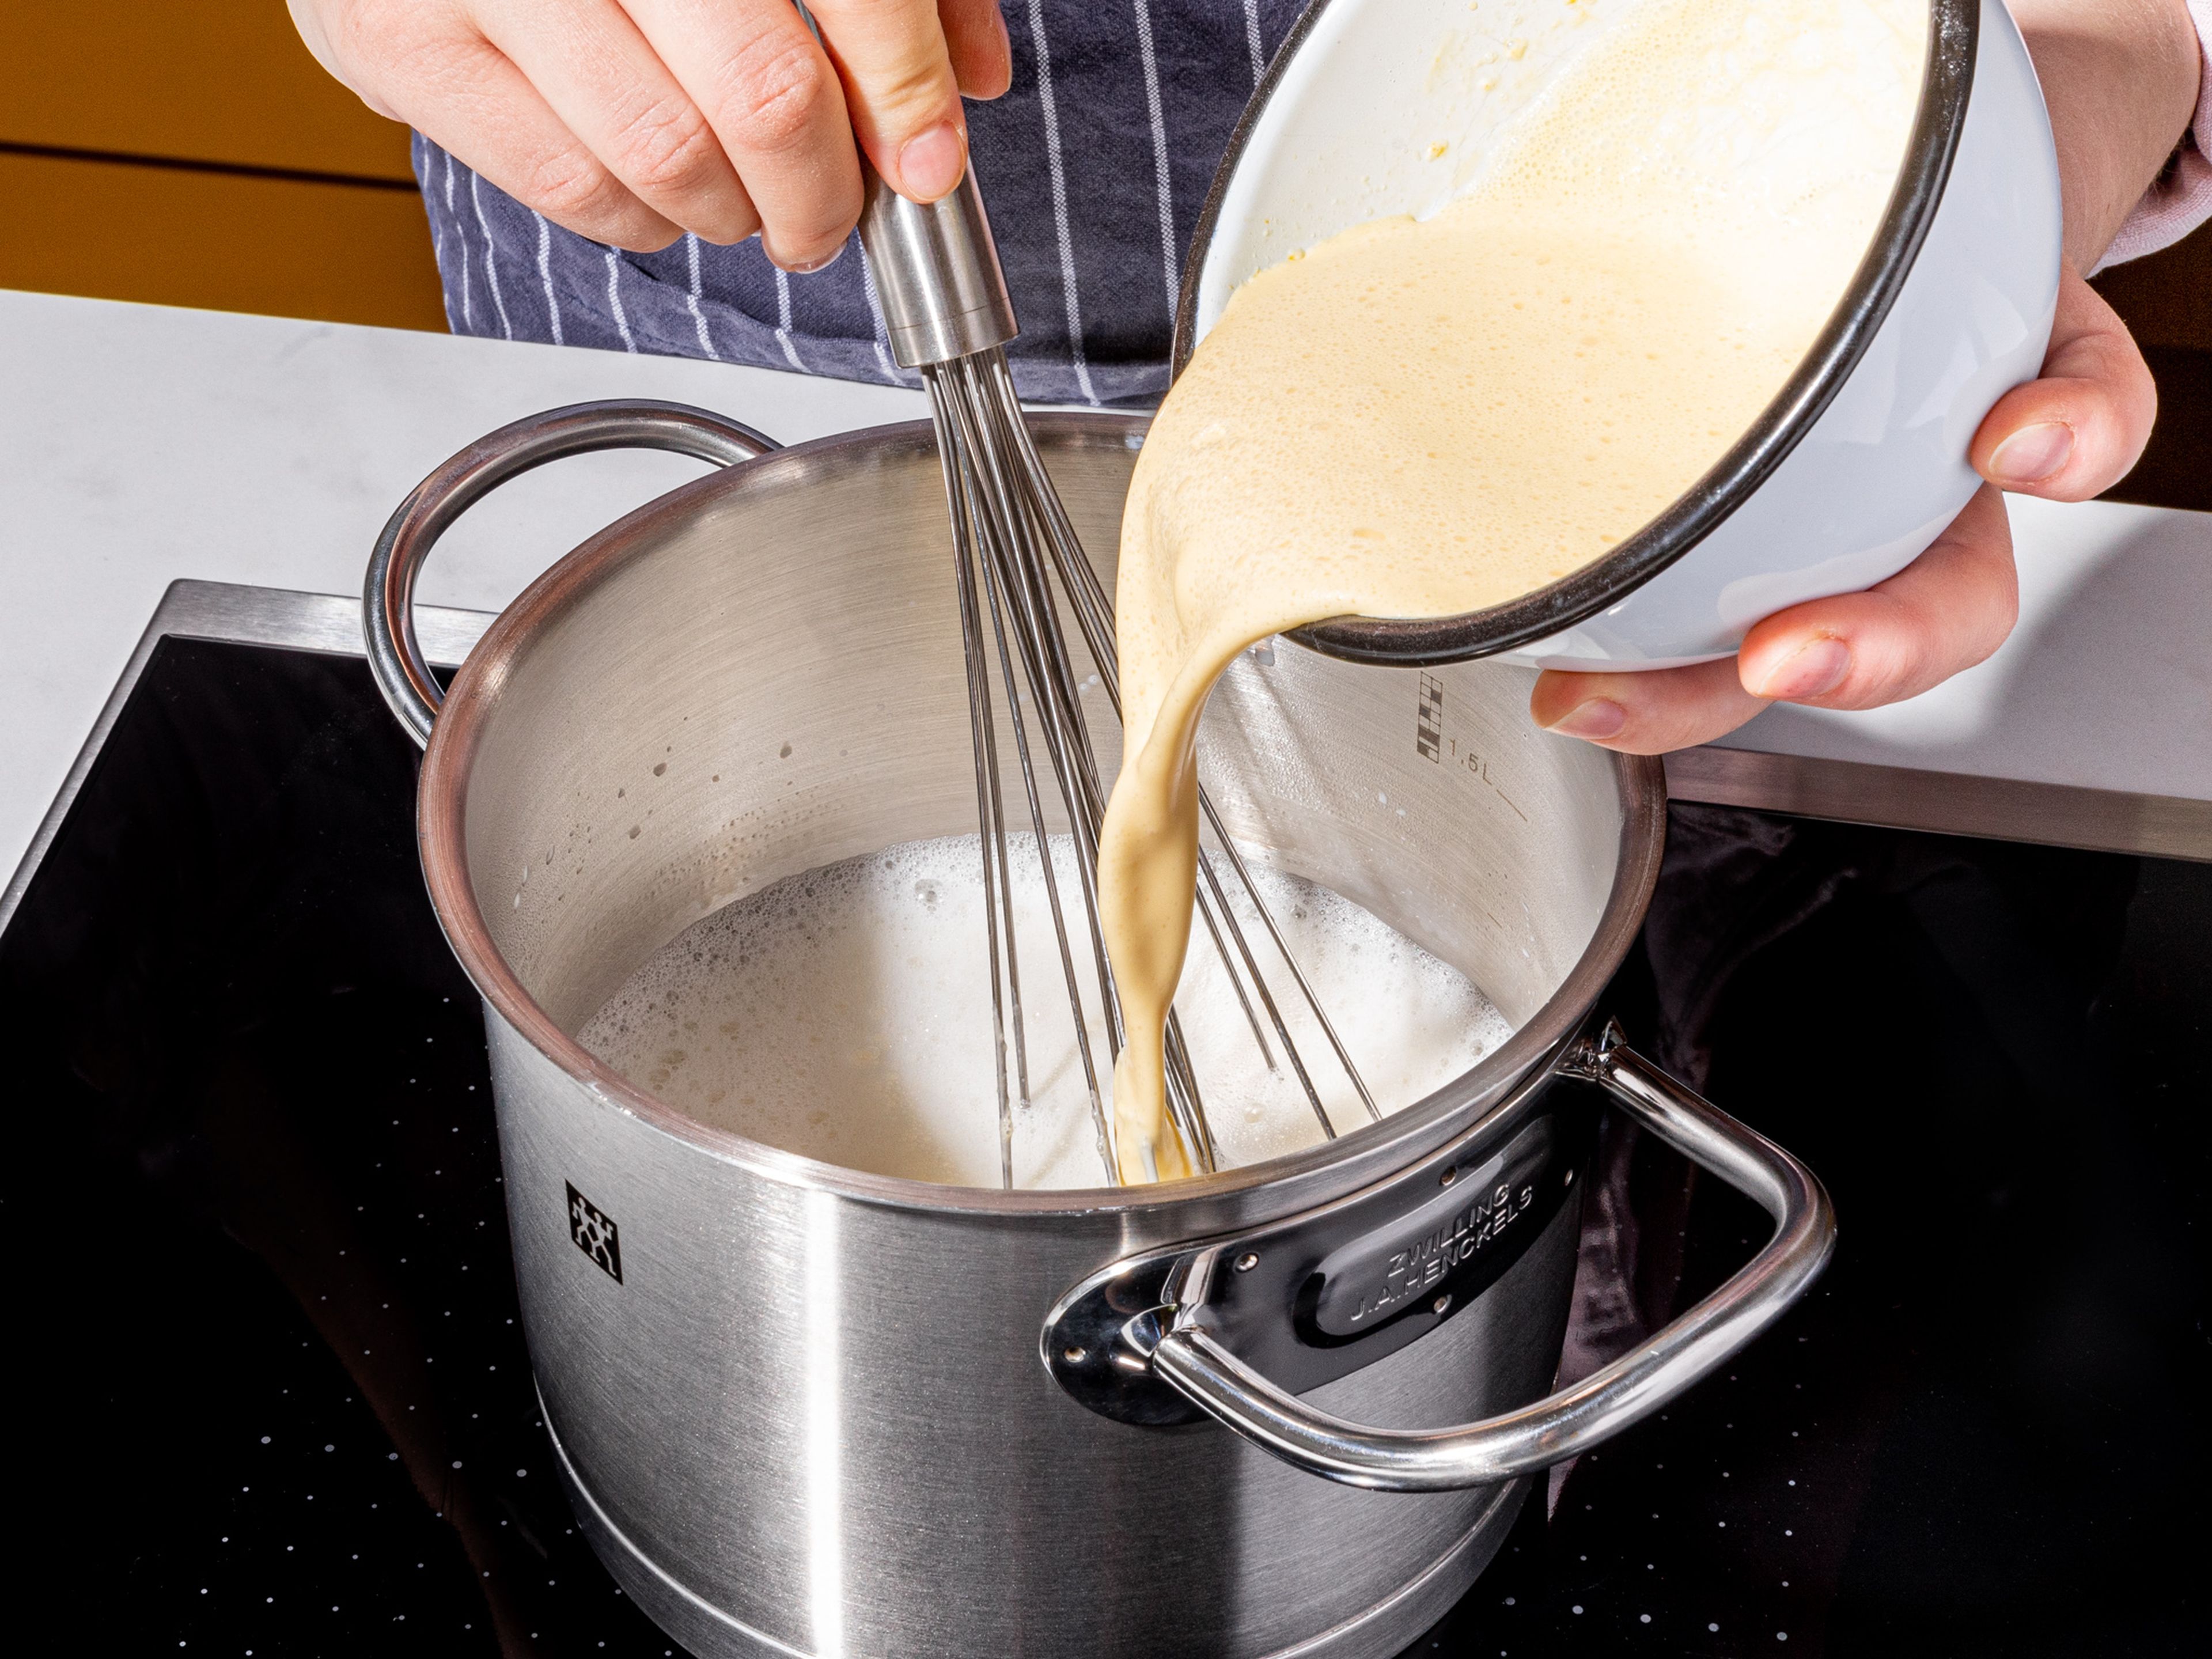 For the filling, heat milk with the remaining sugar in a small saucepan. In a separate bowl, mix some of the cream with the pudding powder. When the milk starts to boil, stir in the pudding mixture until dissolved, and let simmer for approx. 2 min. Then pour into a bowl, cover the surface of the pudding with cling film, and leave to cool in the fridge.